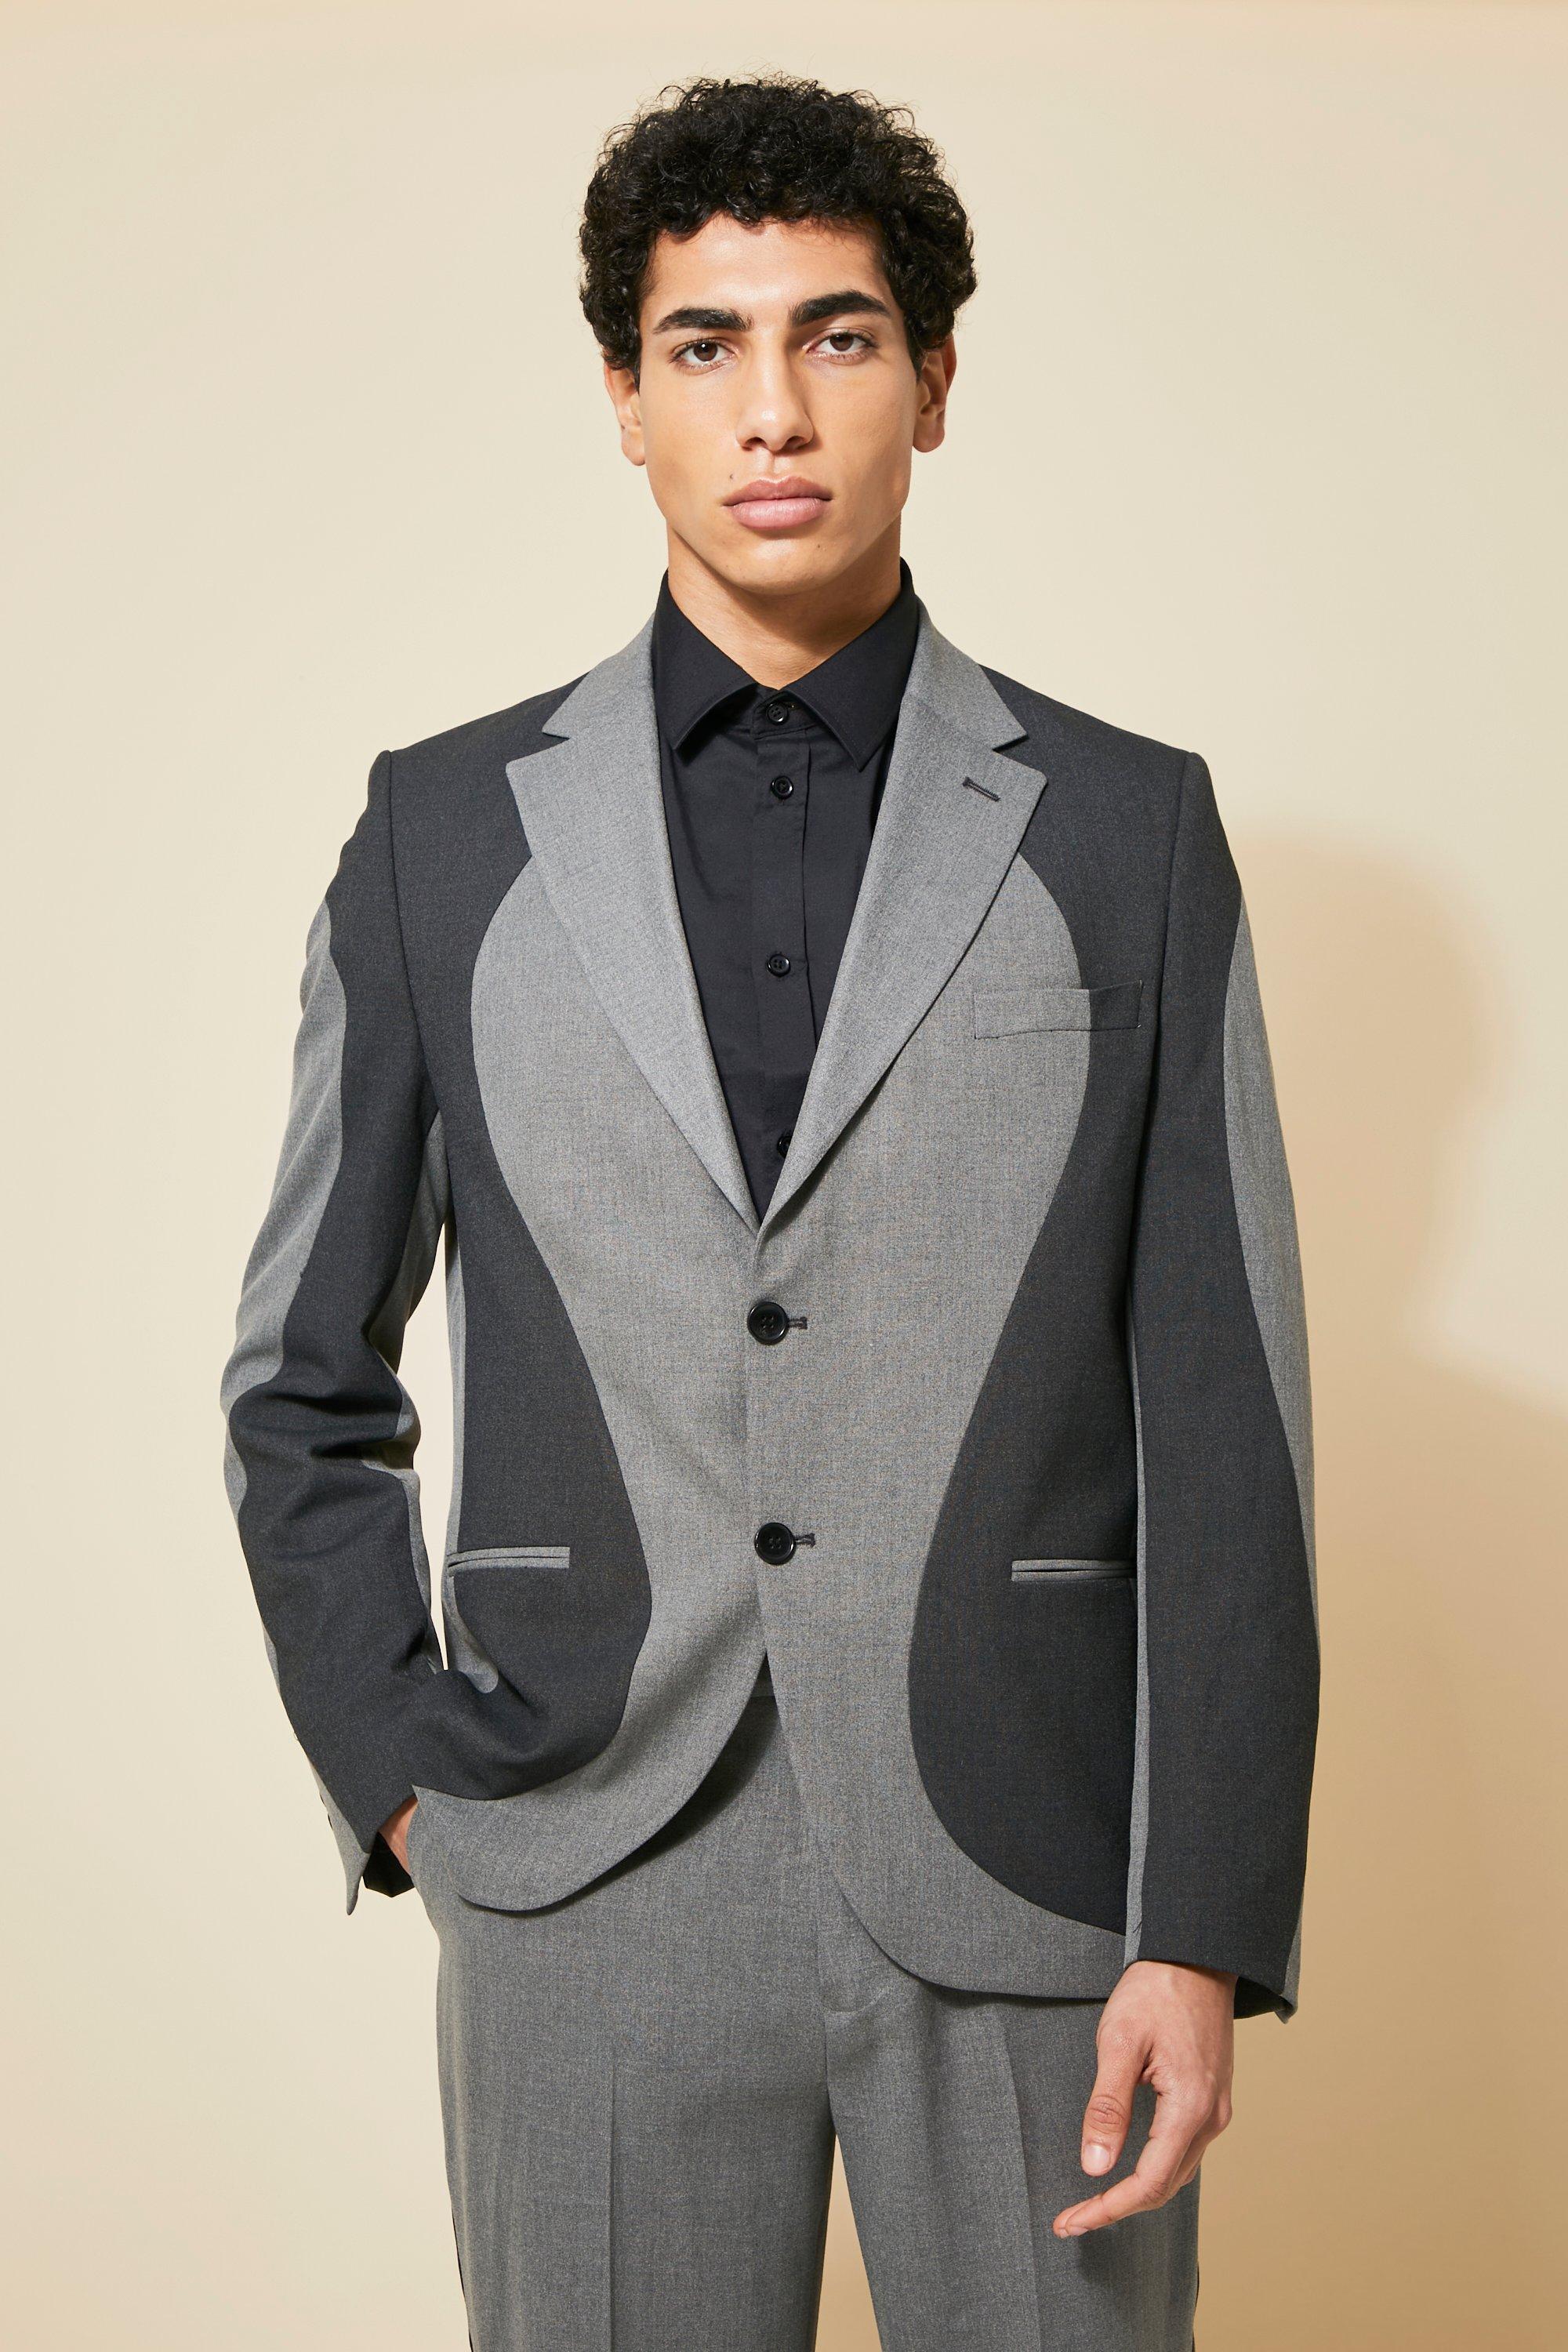 1950s Mens Suits & Sport Coats | 50s Suits & Blazers Mens Single Breasted Relaxed Spliced Suit Jacket - Grey - 40 $120.00 AT vintagedancer.com